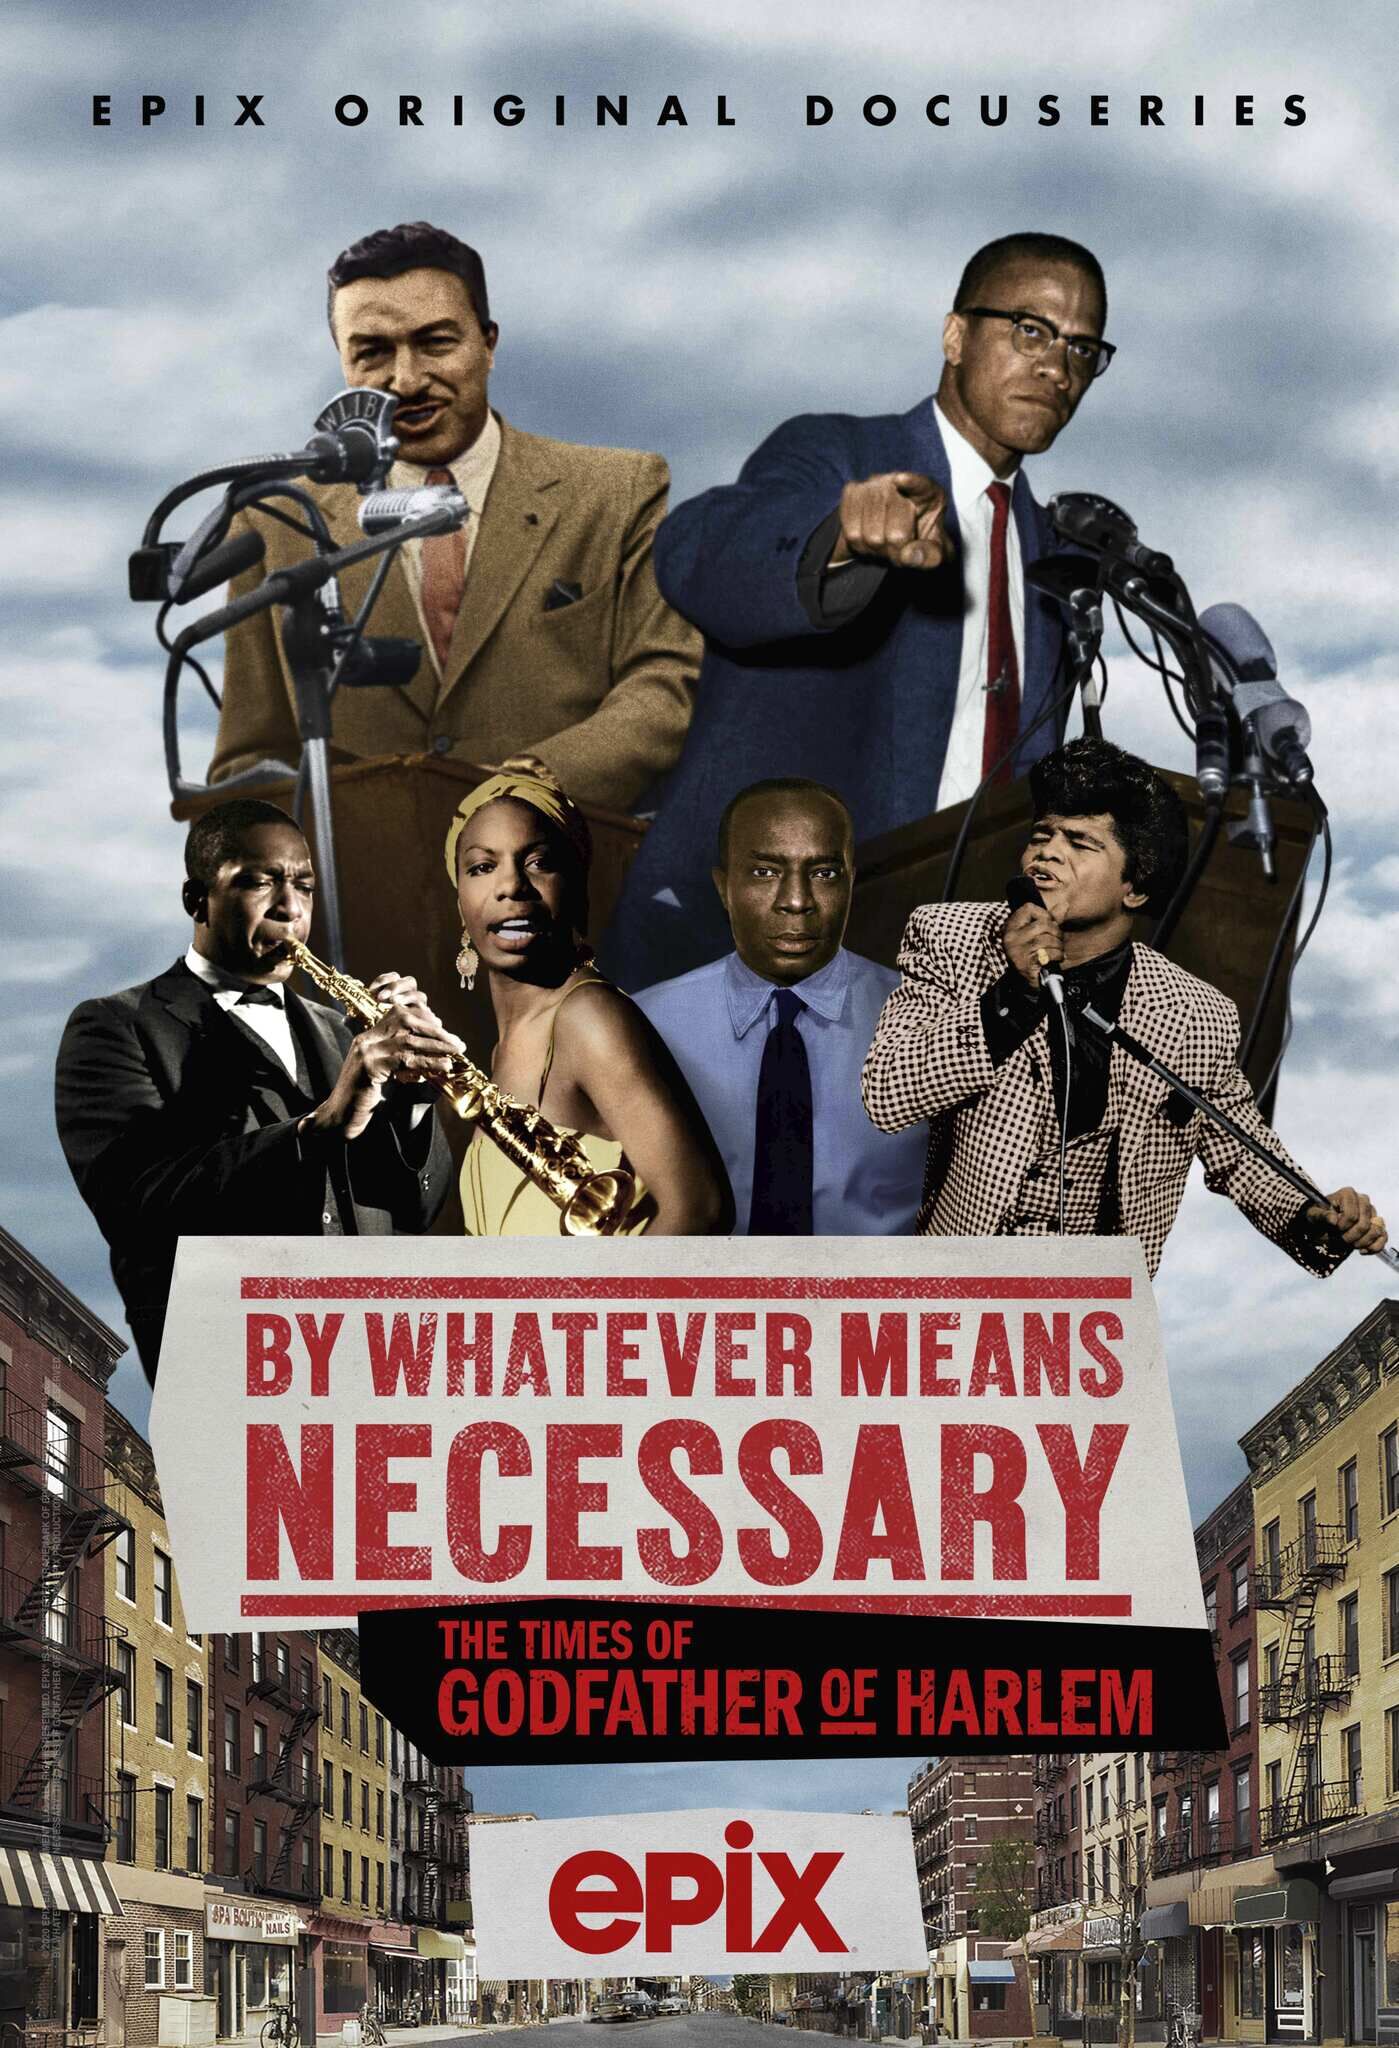 By Whatever Means Necessary: The Times of Godfather of Harlem ne zaman